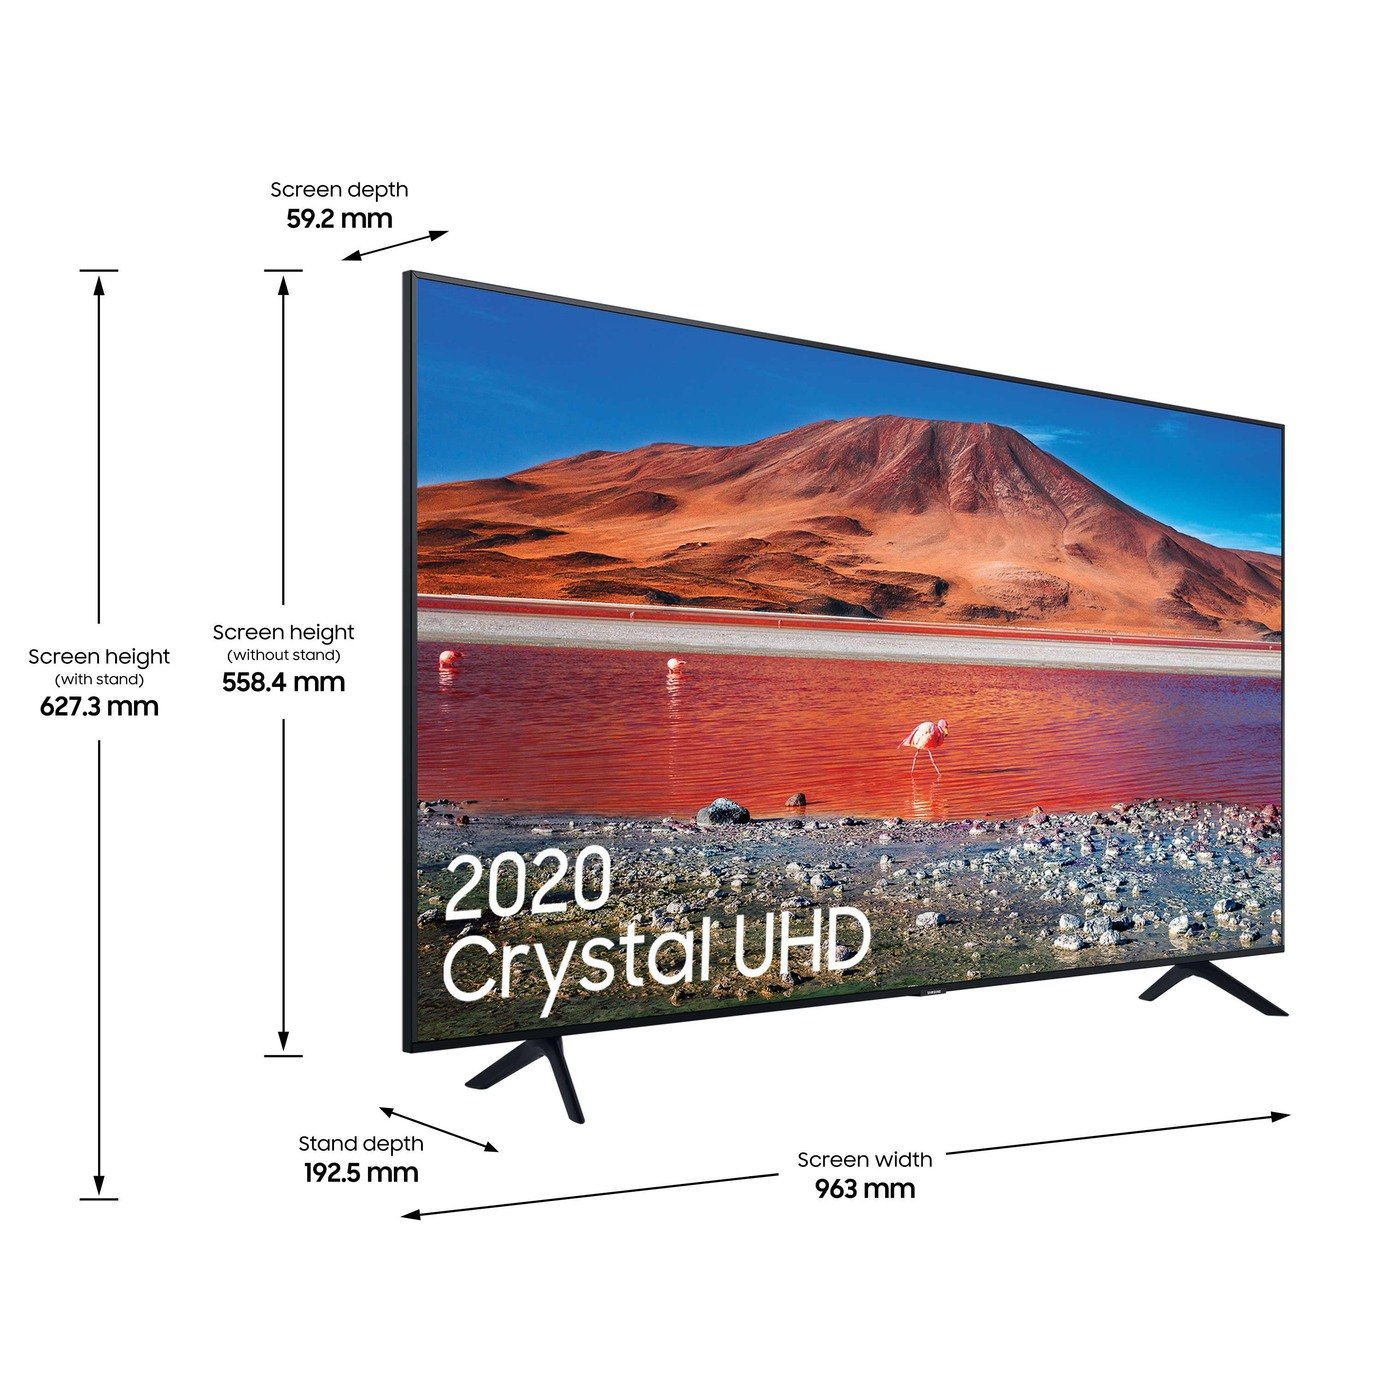 Samsung 43 Inch UE43TU7000KXXU Smart 4K Ultra HD TV with HDR Review